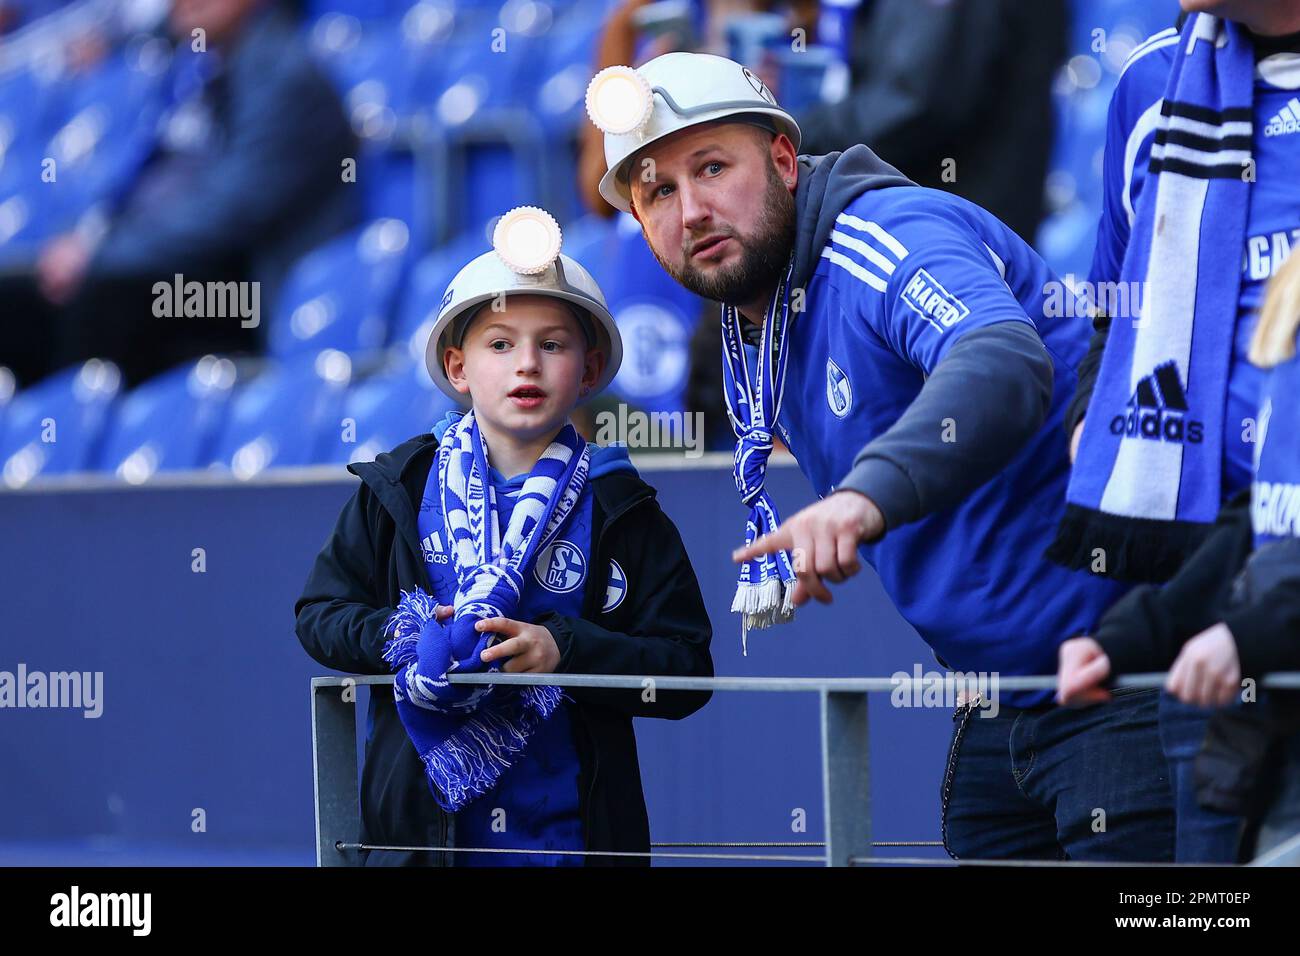 Fans (FC Schalke 04), GER, FC Schalke 04 vs. Hertha BSC, Fussball, 1. Bundesliga, 28. Spieltag, Spielzeit 2022/2023, 14.04.2023  DFL REGULATIONS PROHIBIT ANY USE OF PHOTOGRAPHS AS IMAGE SEQUENCES AND/OR QUASI-VIDEO.  Credit: Ant Palmer/Alamy Live News Stock Photo